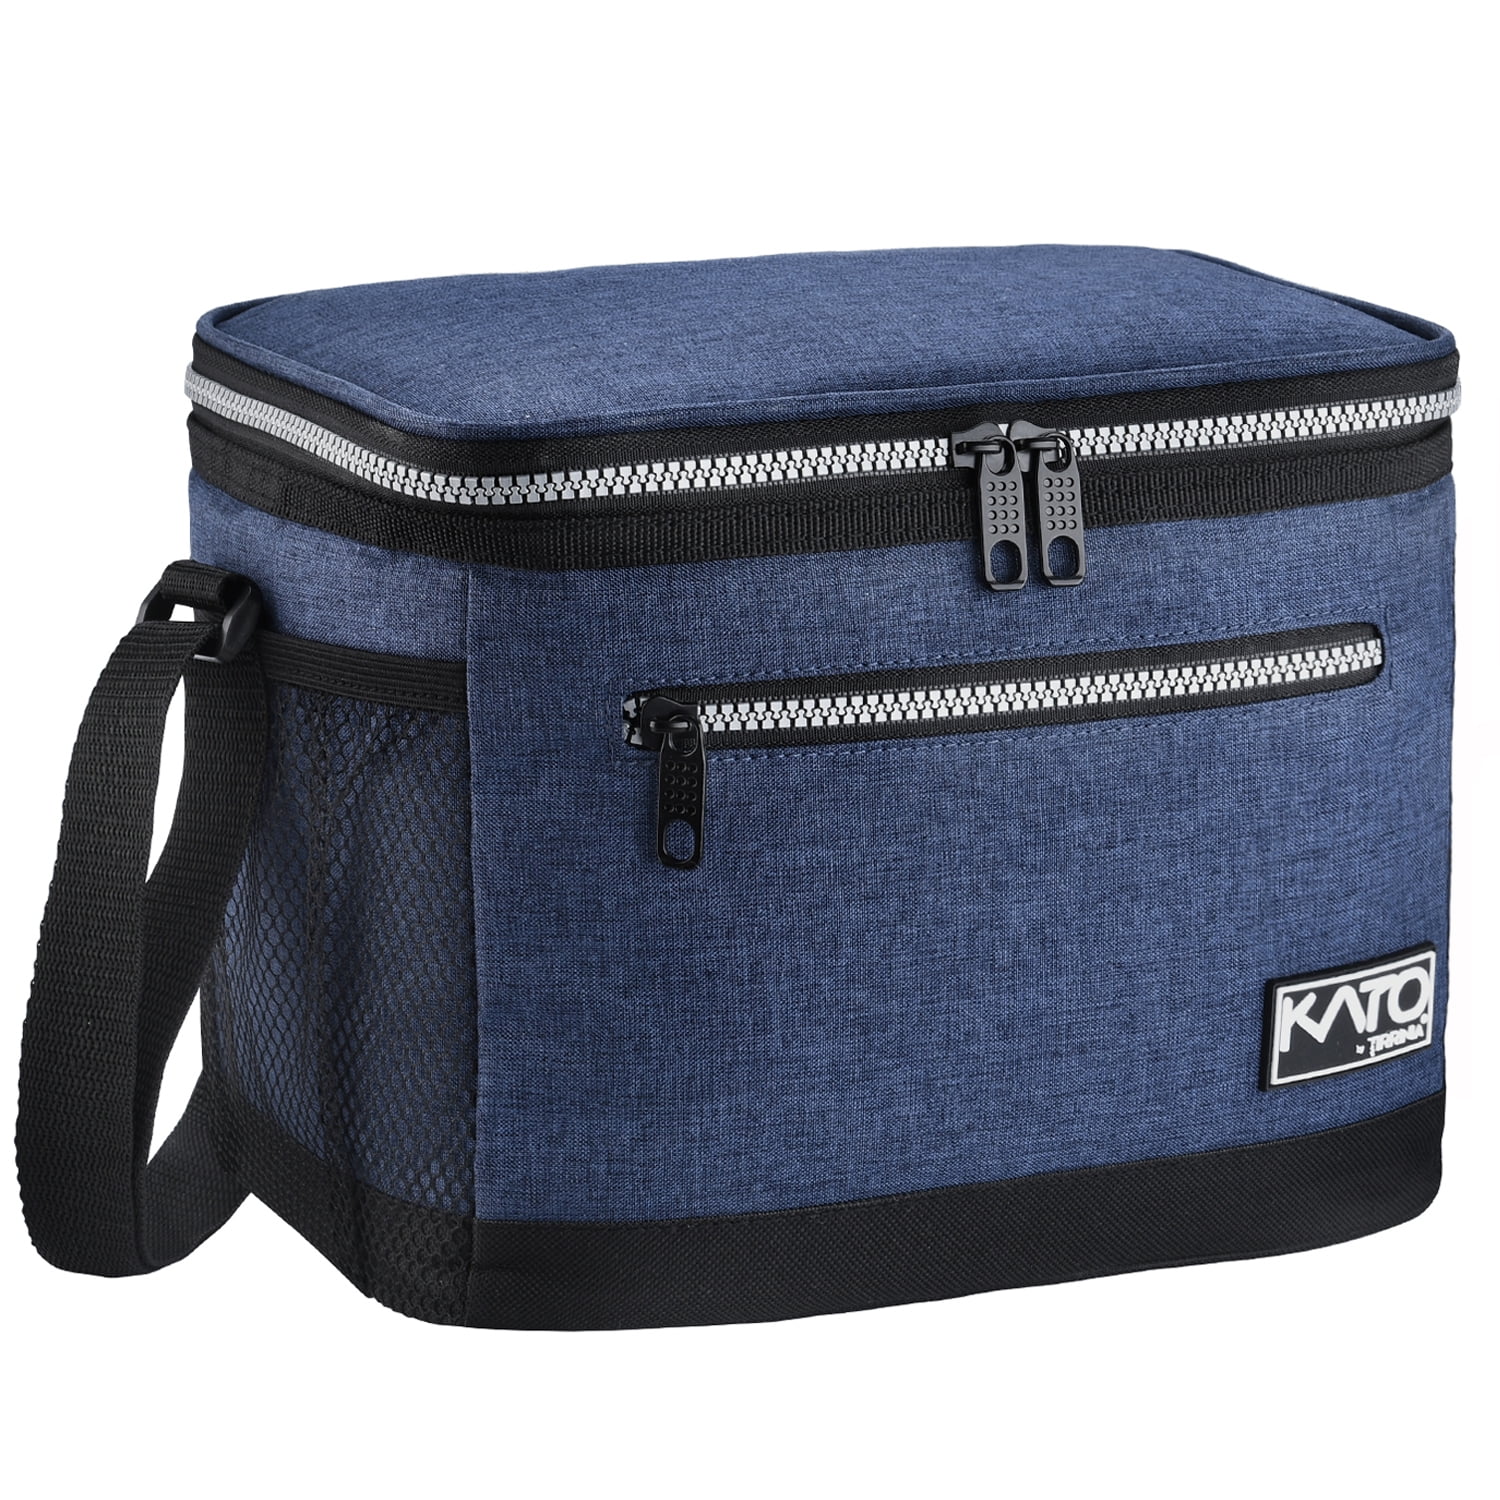 Simple Zipper Lunch Bag, Lunch Box For Office Work School